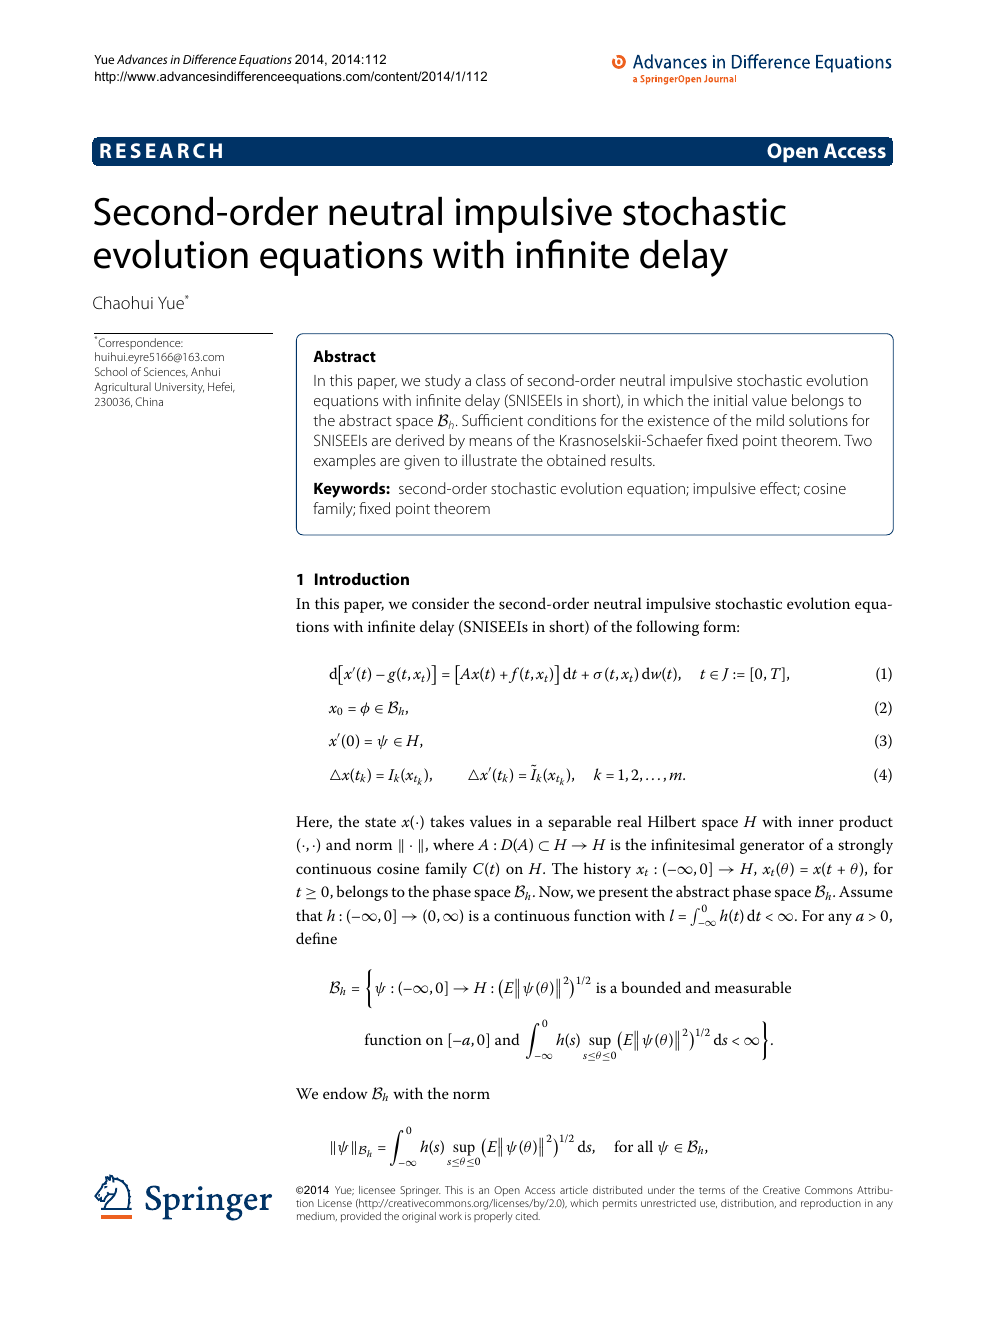 Second Order Neutral Impulsive Stochastic Evolution Equations With Infinite Delay Topic Of Research Paper In Mathematics Download Scholarly Article Pdf And Read For Free On Cyberleninka Open Science Hub